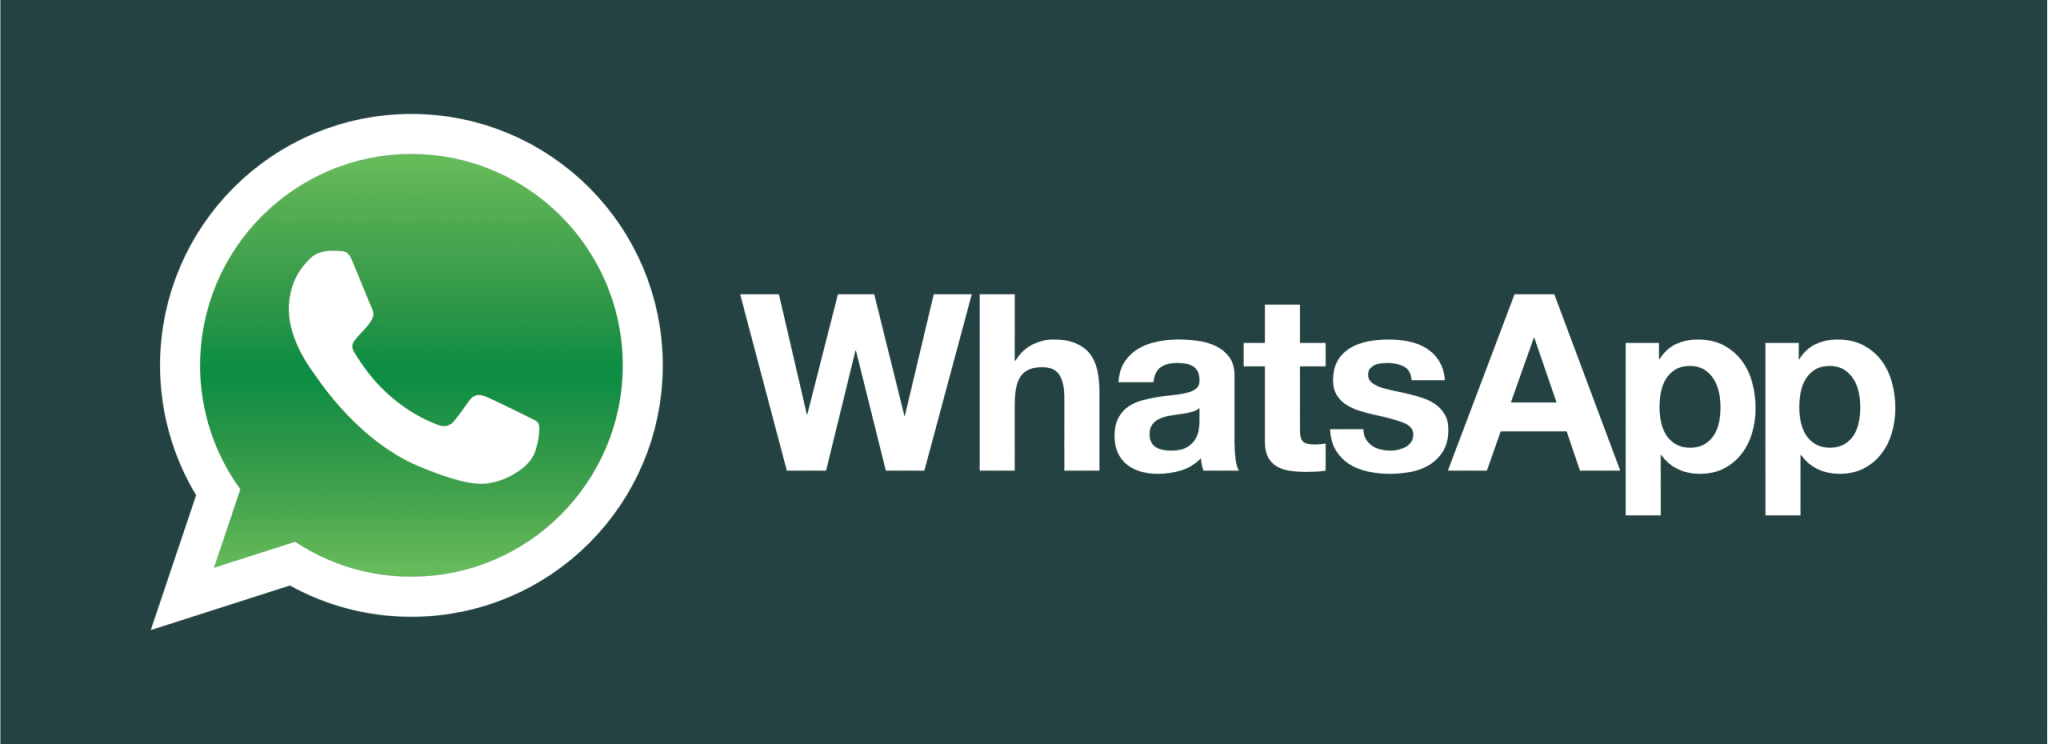 How-to-use-WhatsApp-without-your-phone-number